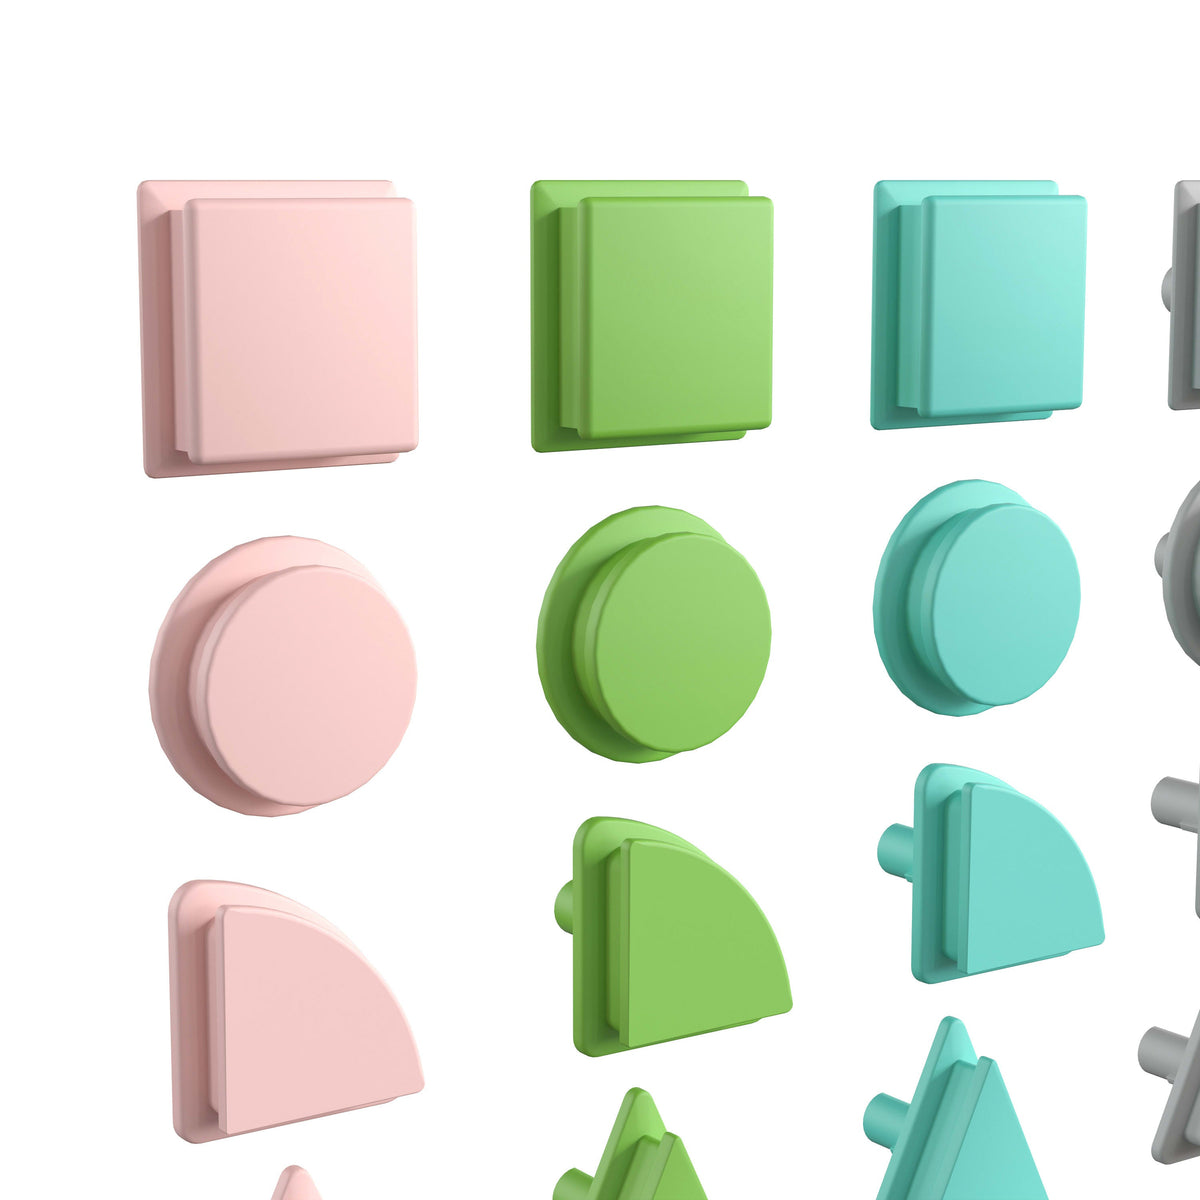 Commercial Grade 256 Piece Shapes Set for Modular STEAM Walls - Pastel